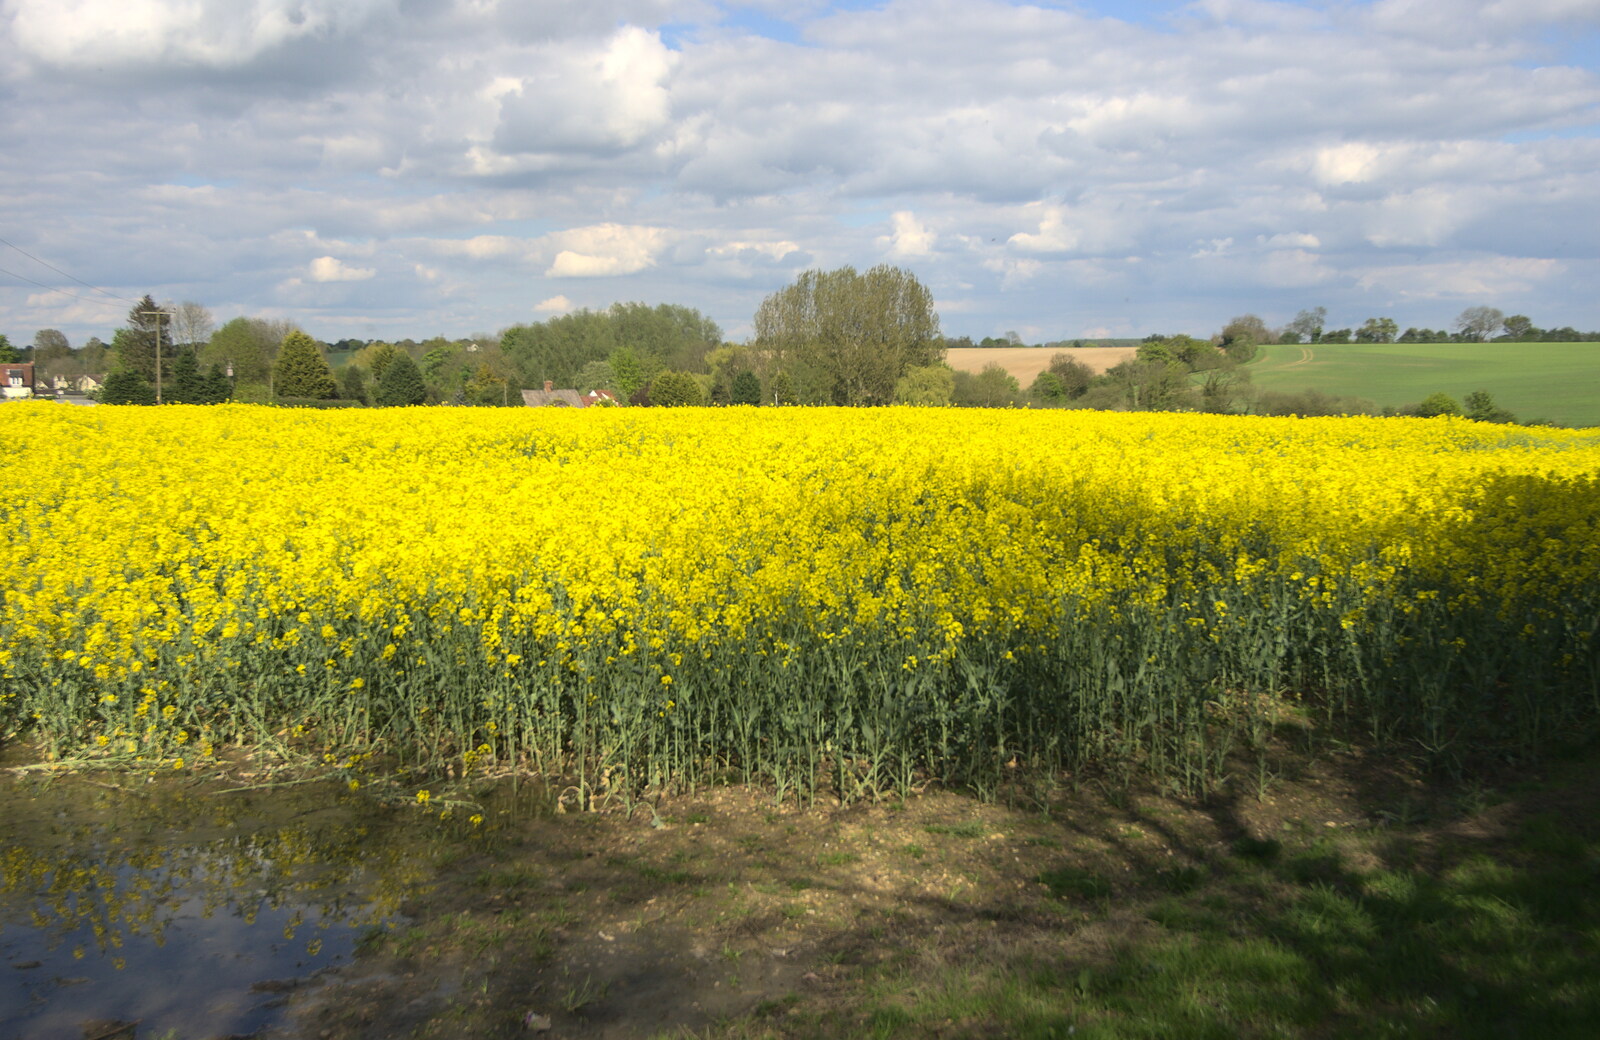 A yellow field of oilseed rape from The BSCC Cycling Weekend, The Swan Inn, Thaxted, Essex - 12th May 2012